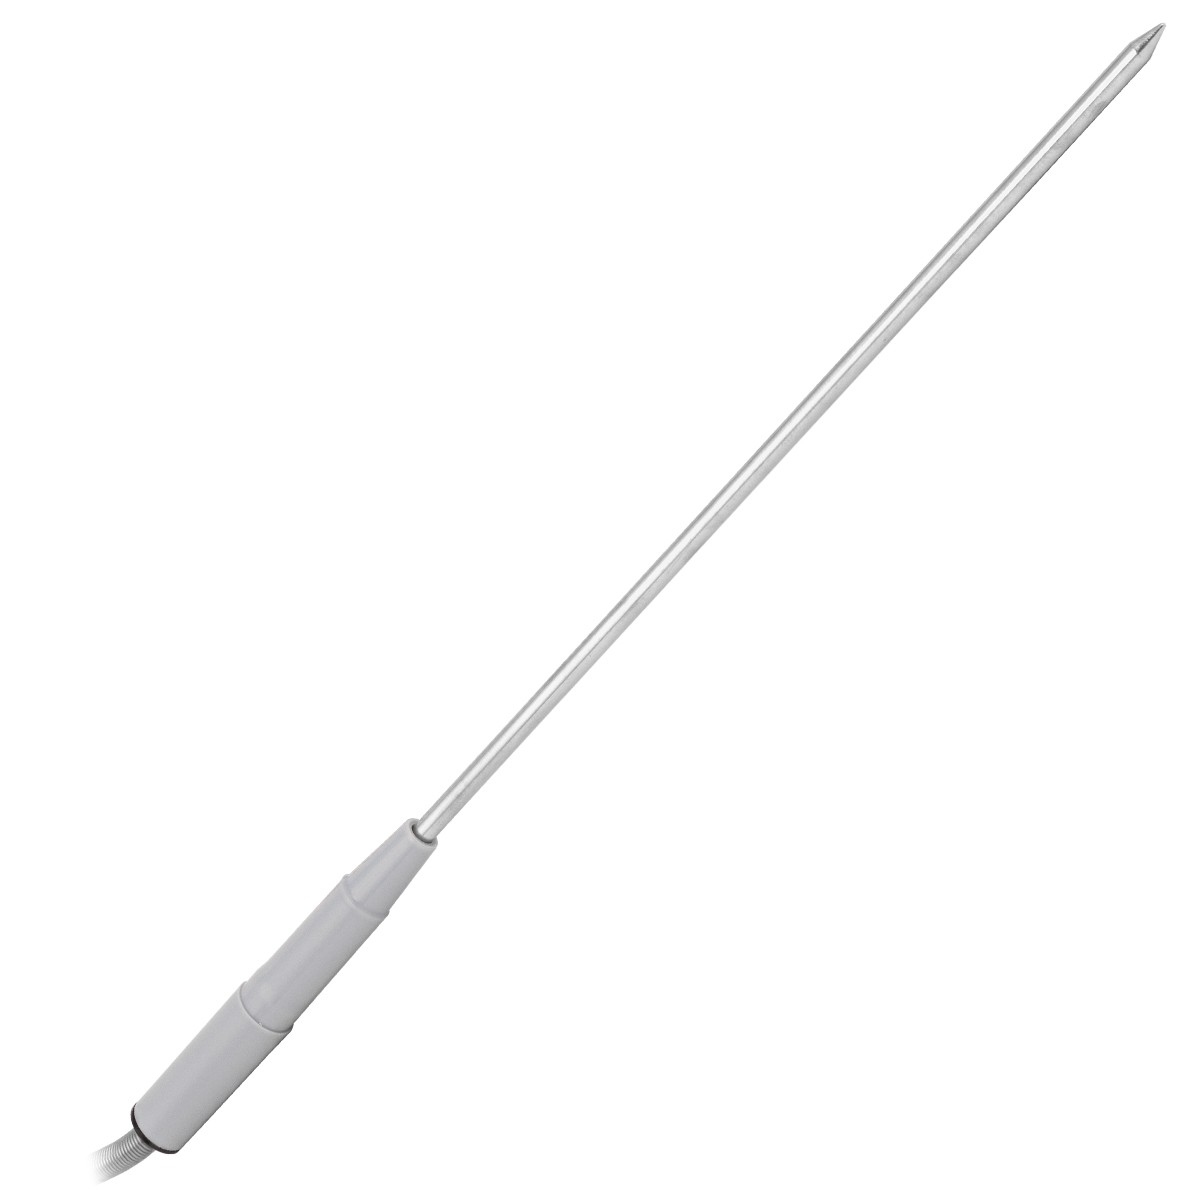 4111 Replacement Probe for 4000